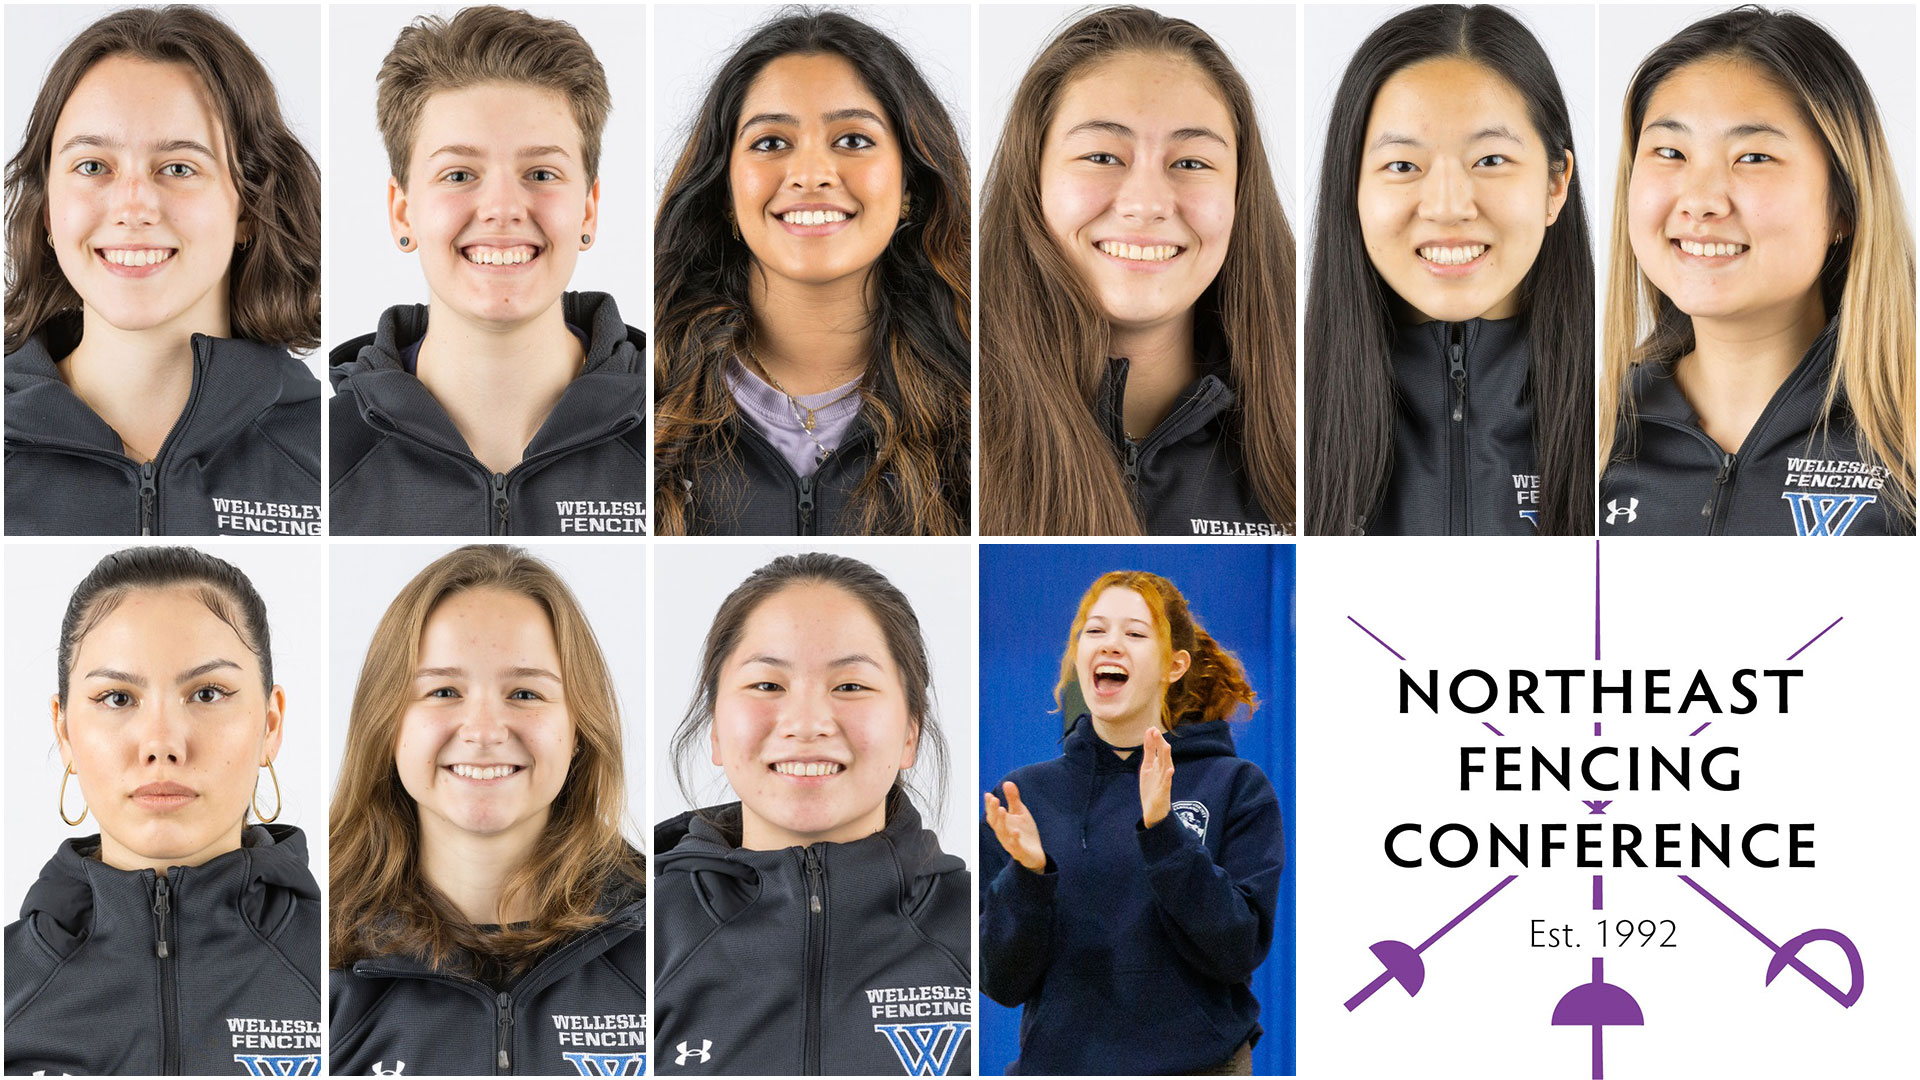 Wellesley had 10 fencers named to the Northeast Fencing Conference Academic All-Conference Team